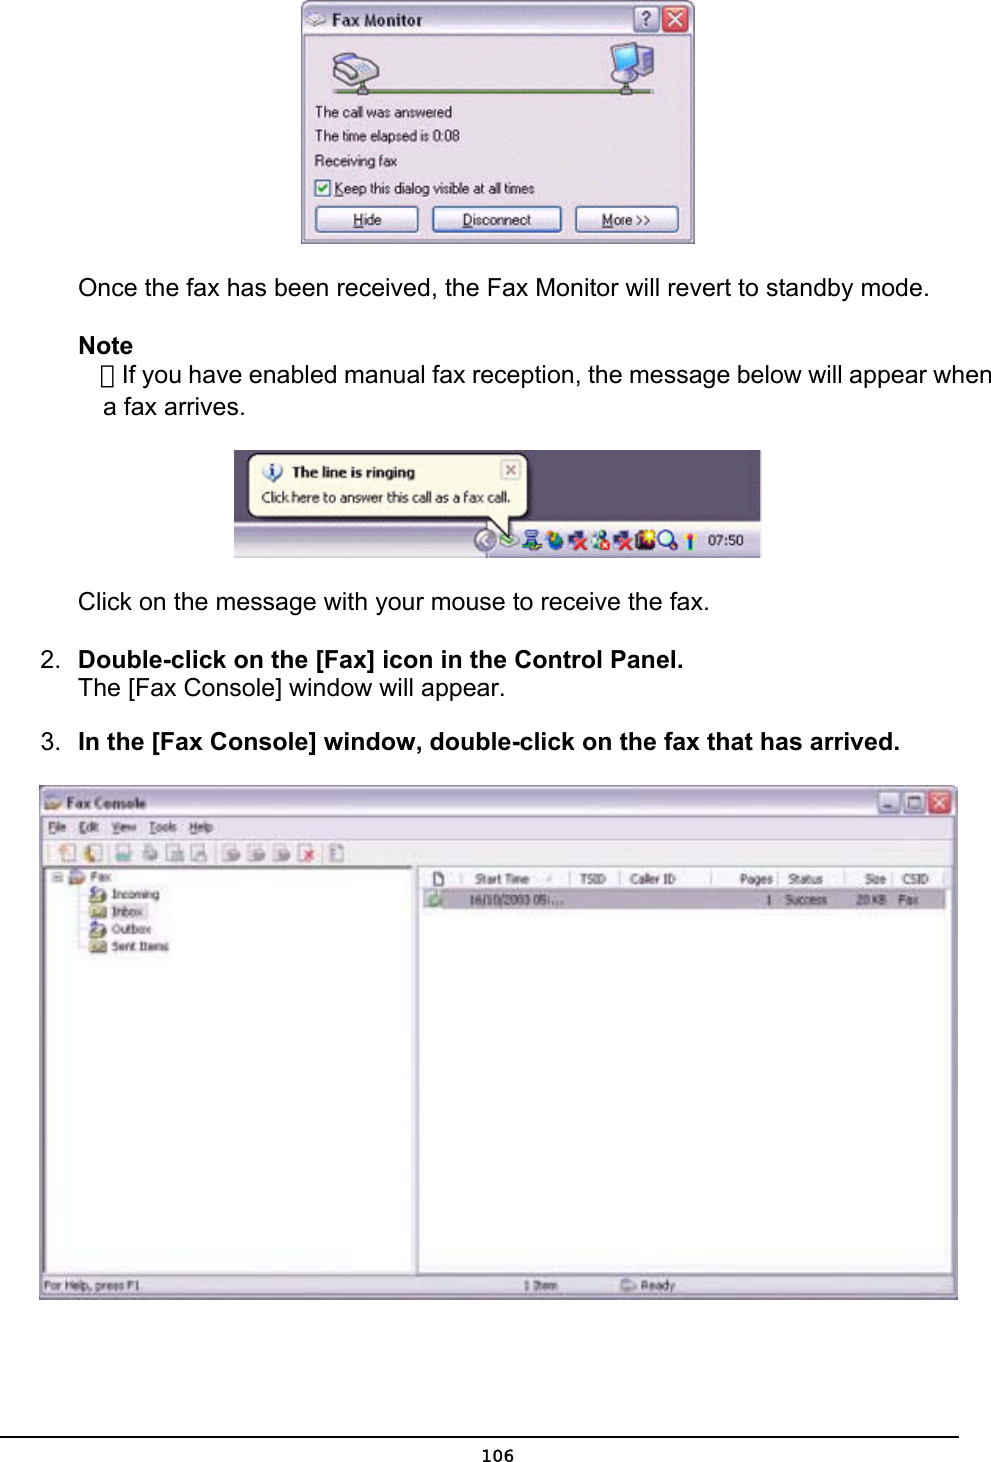         Once the fax has been received, the Fax Monitor will revert to standby mode.   Note  ．If you have enabled manual fax reception, the message below will appear when   a fax arrives.  Click on the message with your mouse to receive the fax. 2.  Double-click on the [Fax] icon in the Control Panel. The [Fax Console] window will appear. 3.  In the [Fax Console] window, double-click on the fax that has arrived.   106